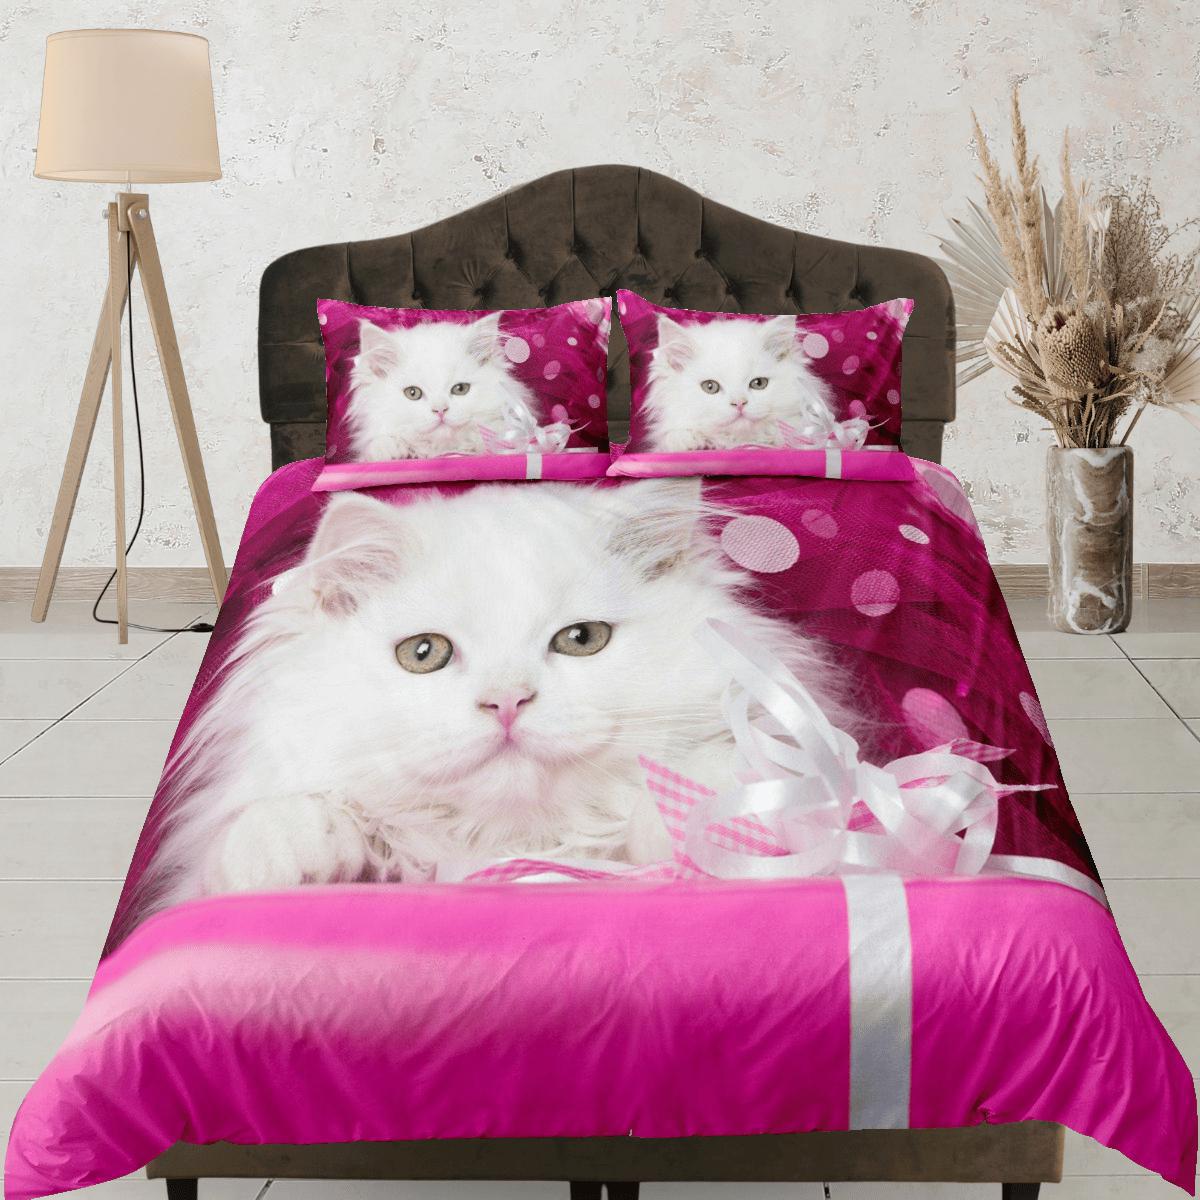 daintyduvet Pink Duvet Cover Set Cute White Cat Bedspread, Animal Dorm Bedding with Pillowcase